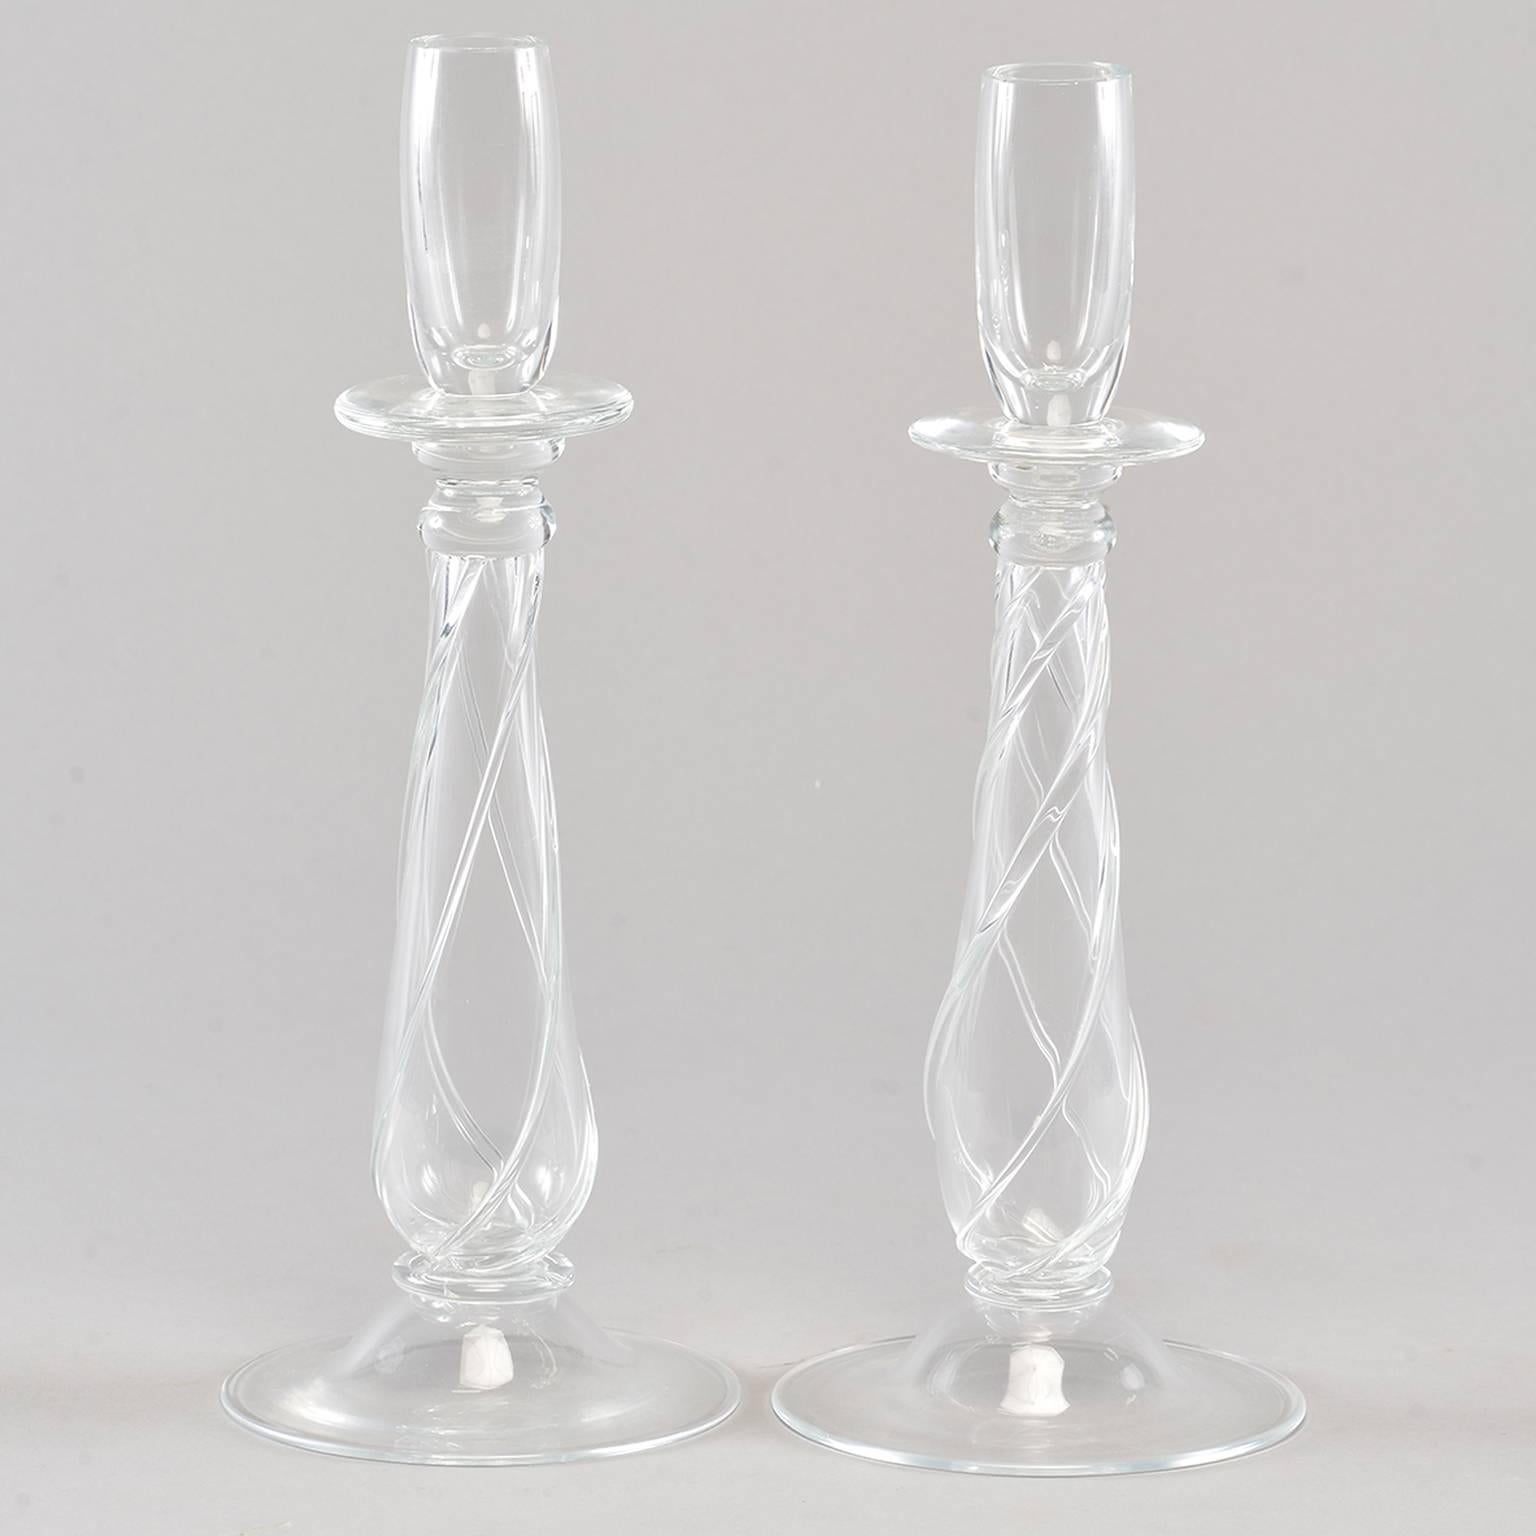 Pair of Deco Era Barovier and Toso Clear Glass Candlesticks In Excellent Condition For Sale In Troy, MI